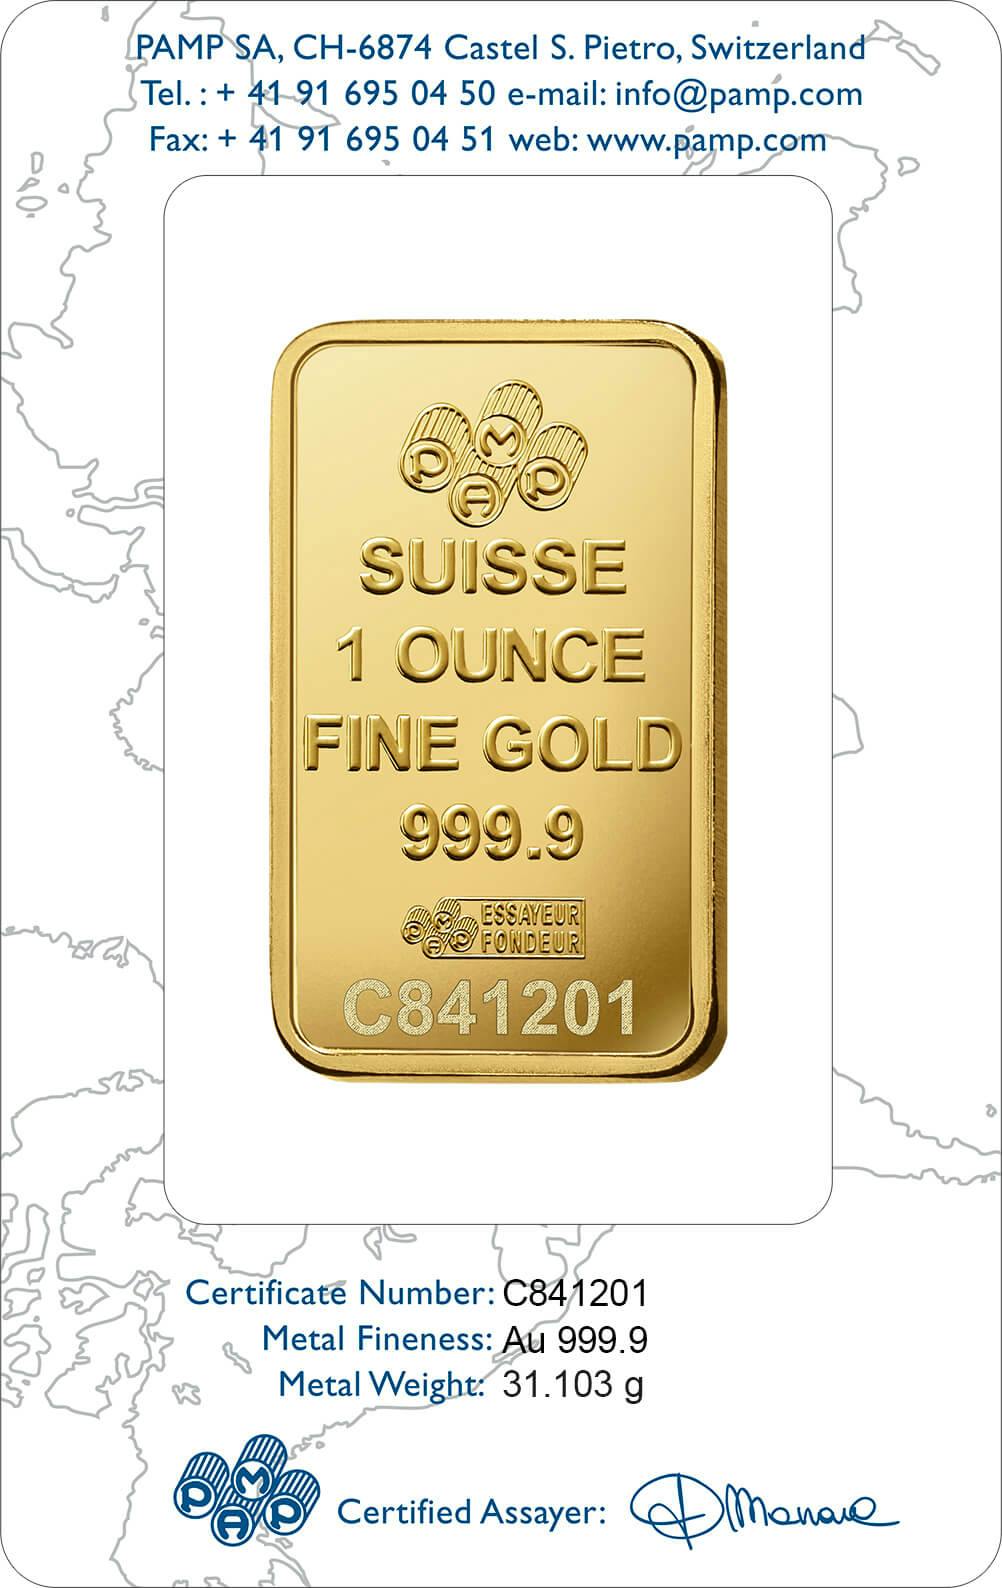 Invest in 1 oz Fine Gold Liberty - PAMP Swiss - Back